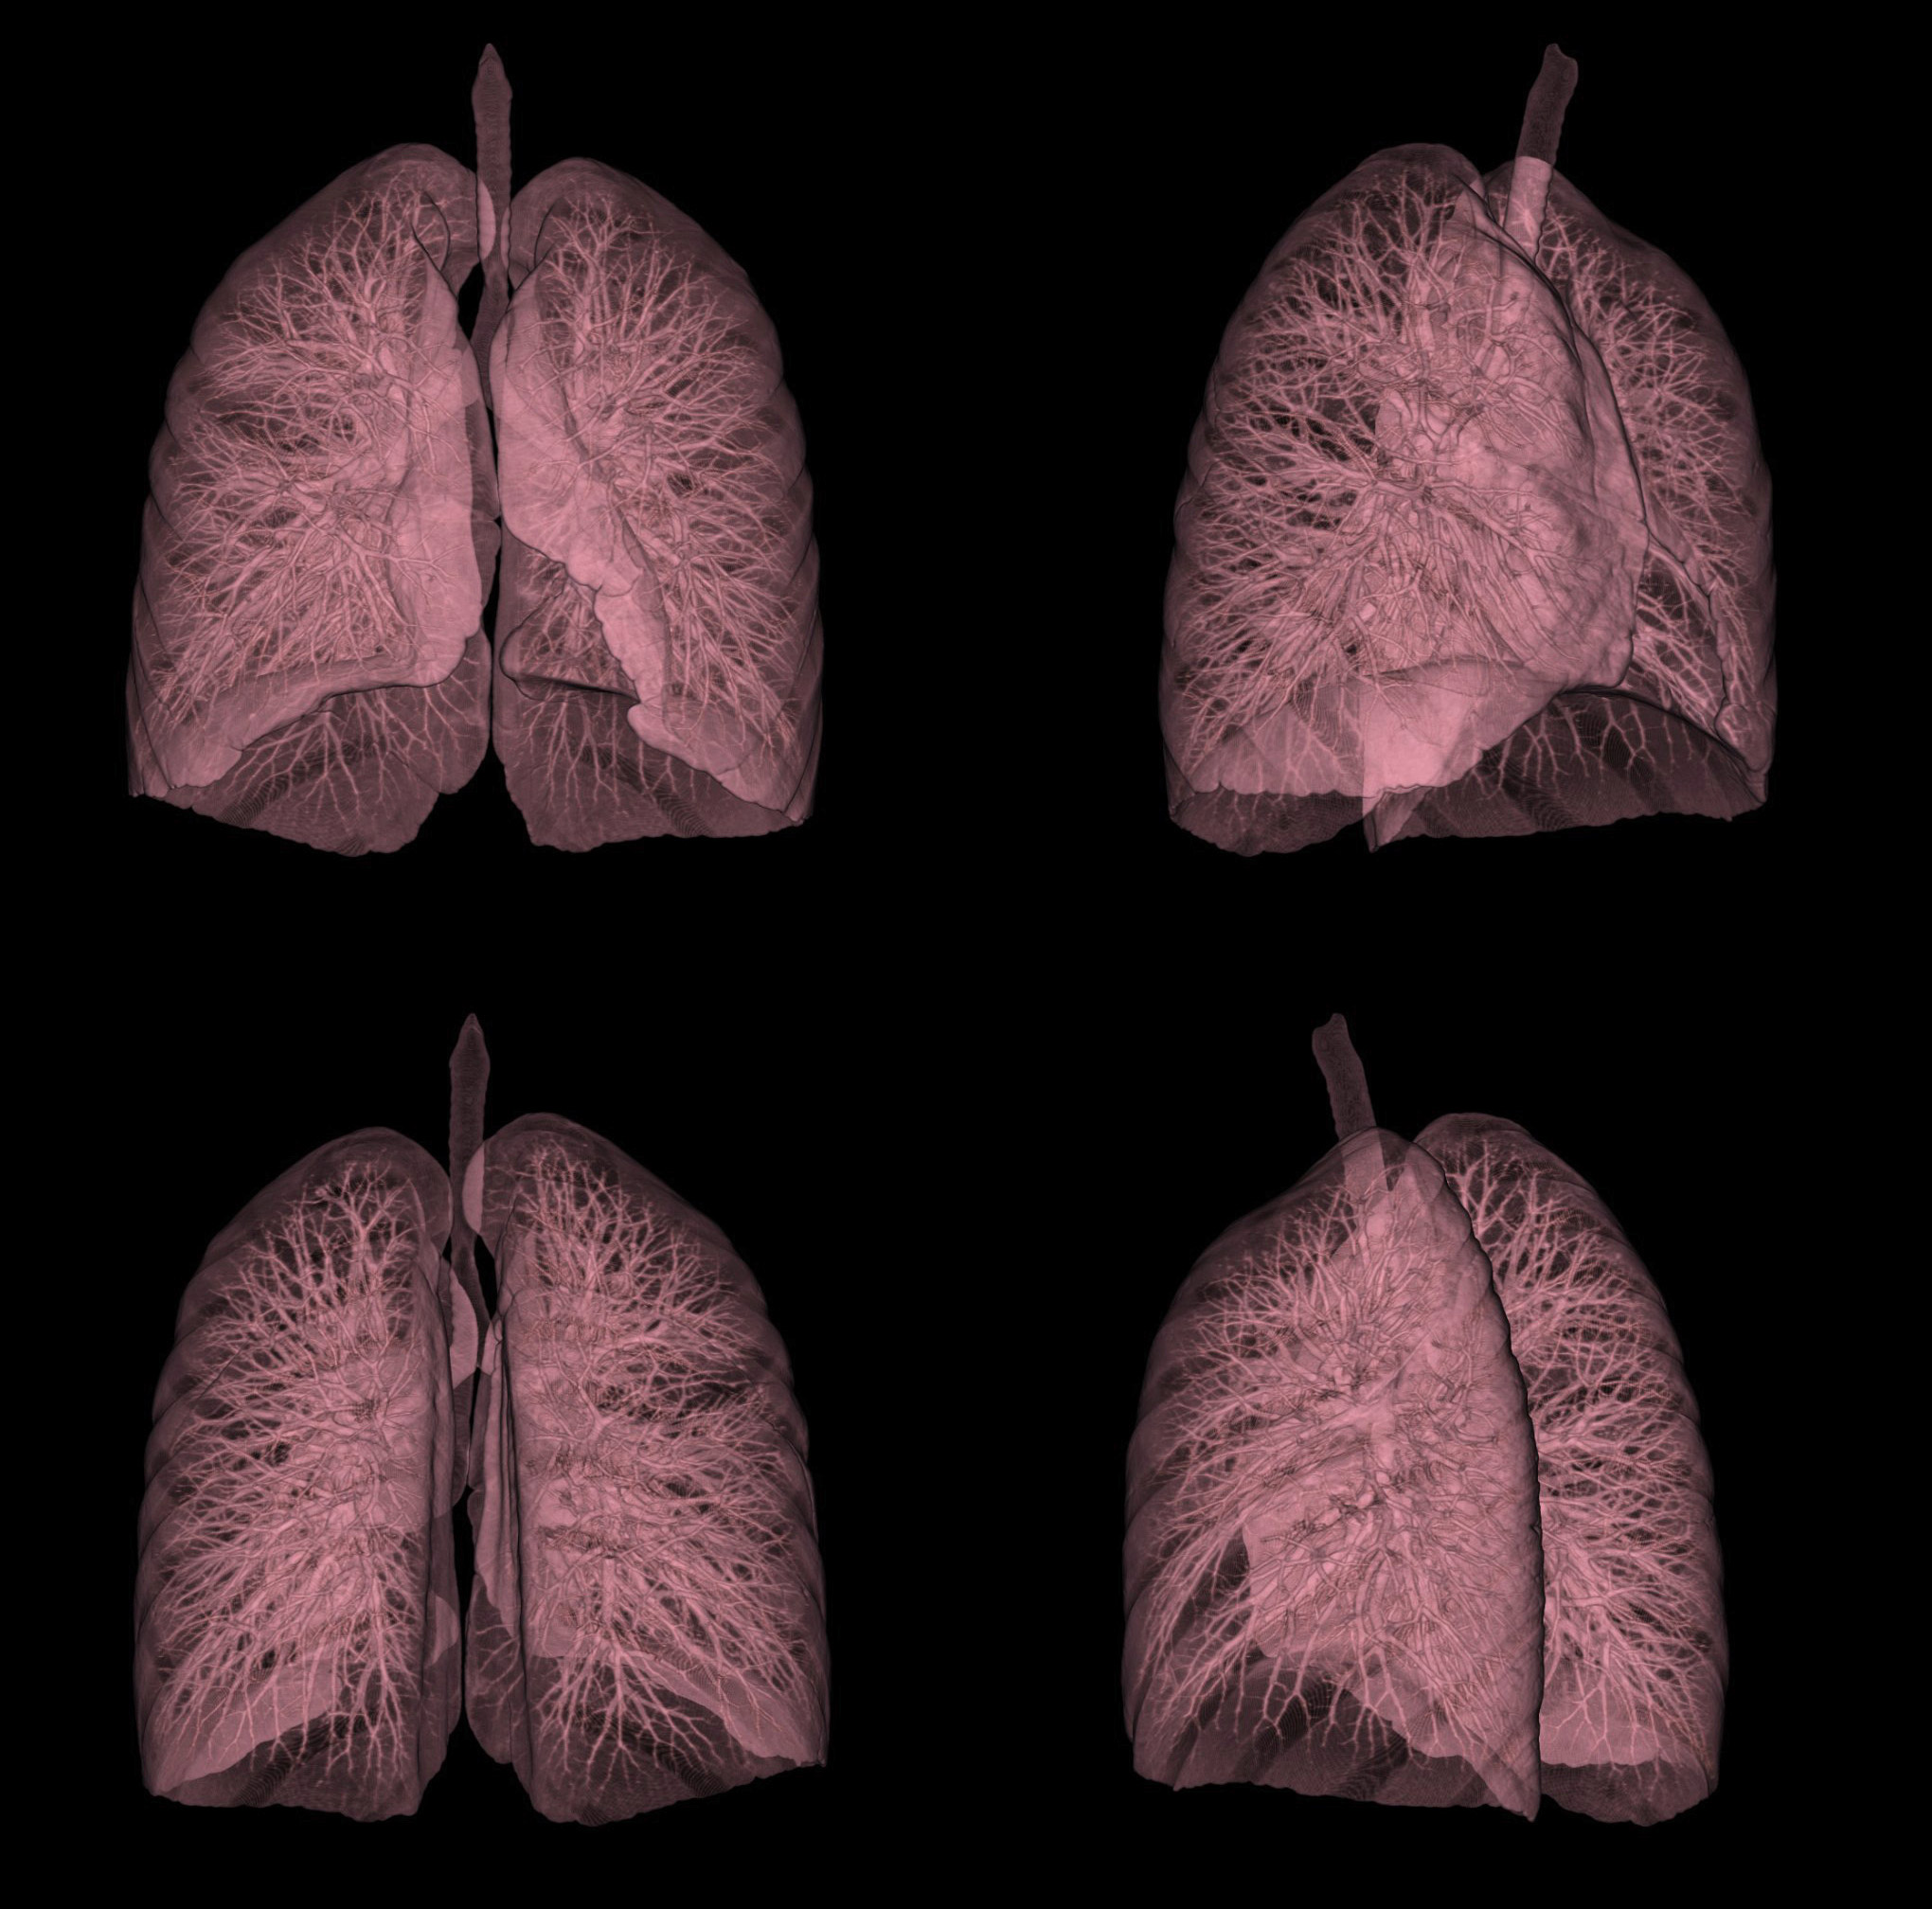 CT Screening Significantly Reduces Lung Cancer Mortality | National